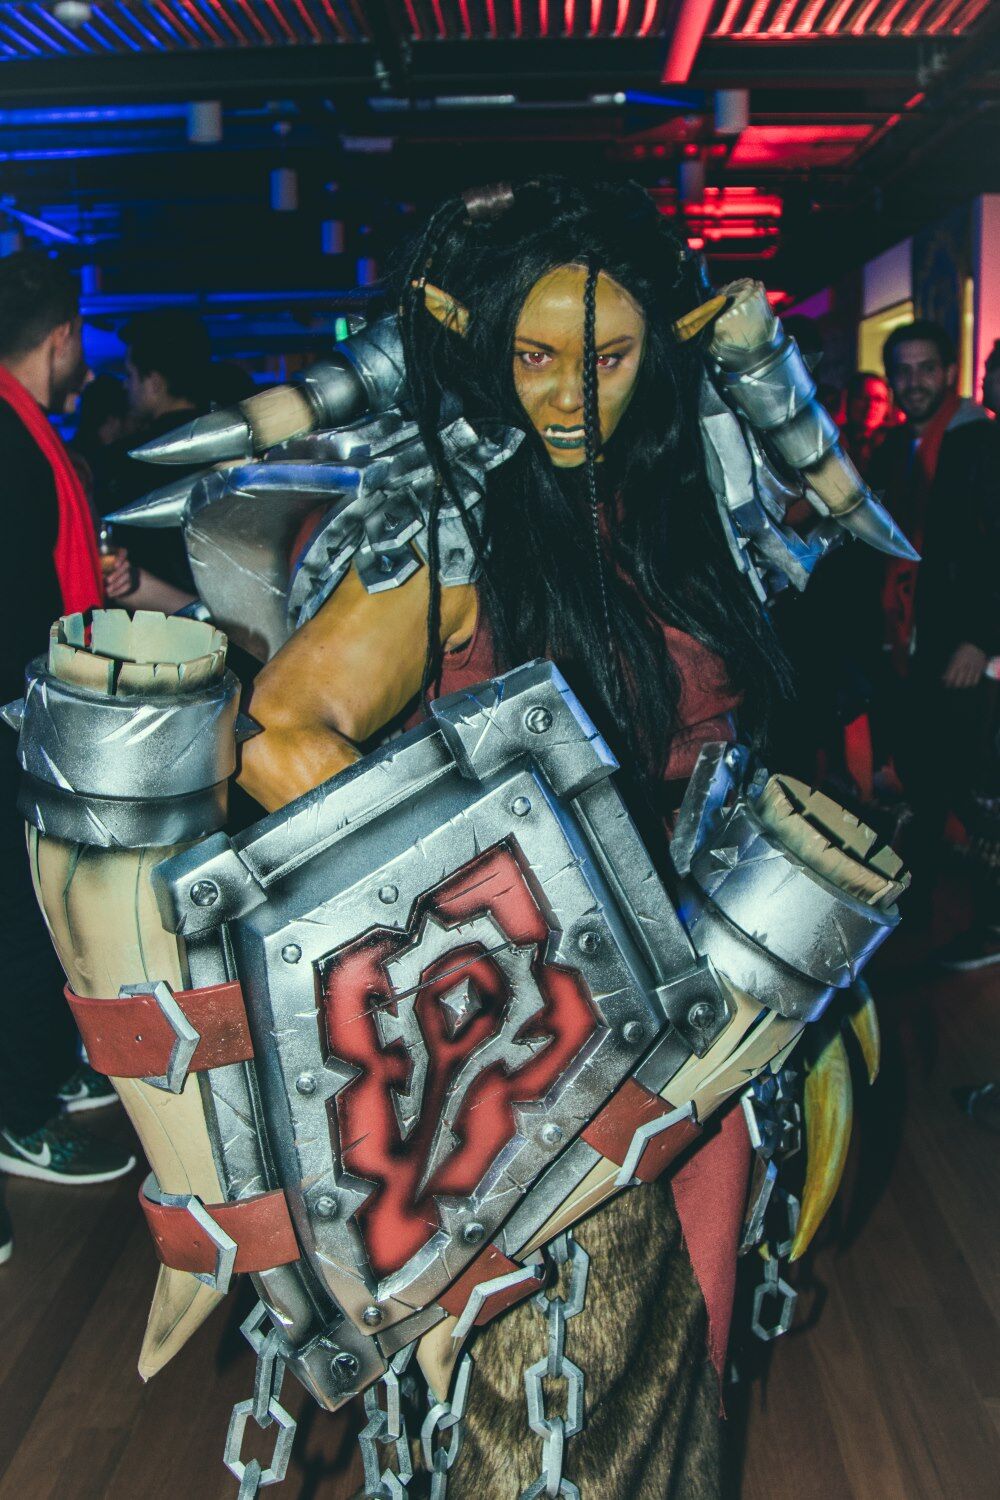 Clare McCutcheon as a Horde Warfront Orc at the Battle For Azeroth launch event in Sydney.